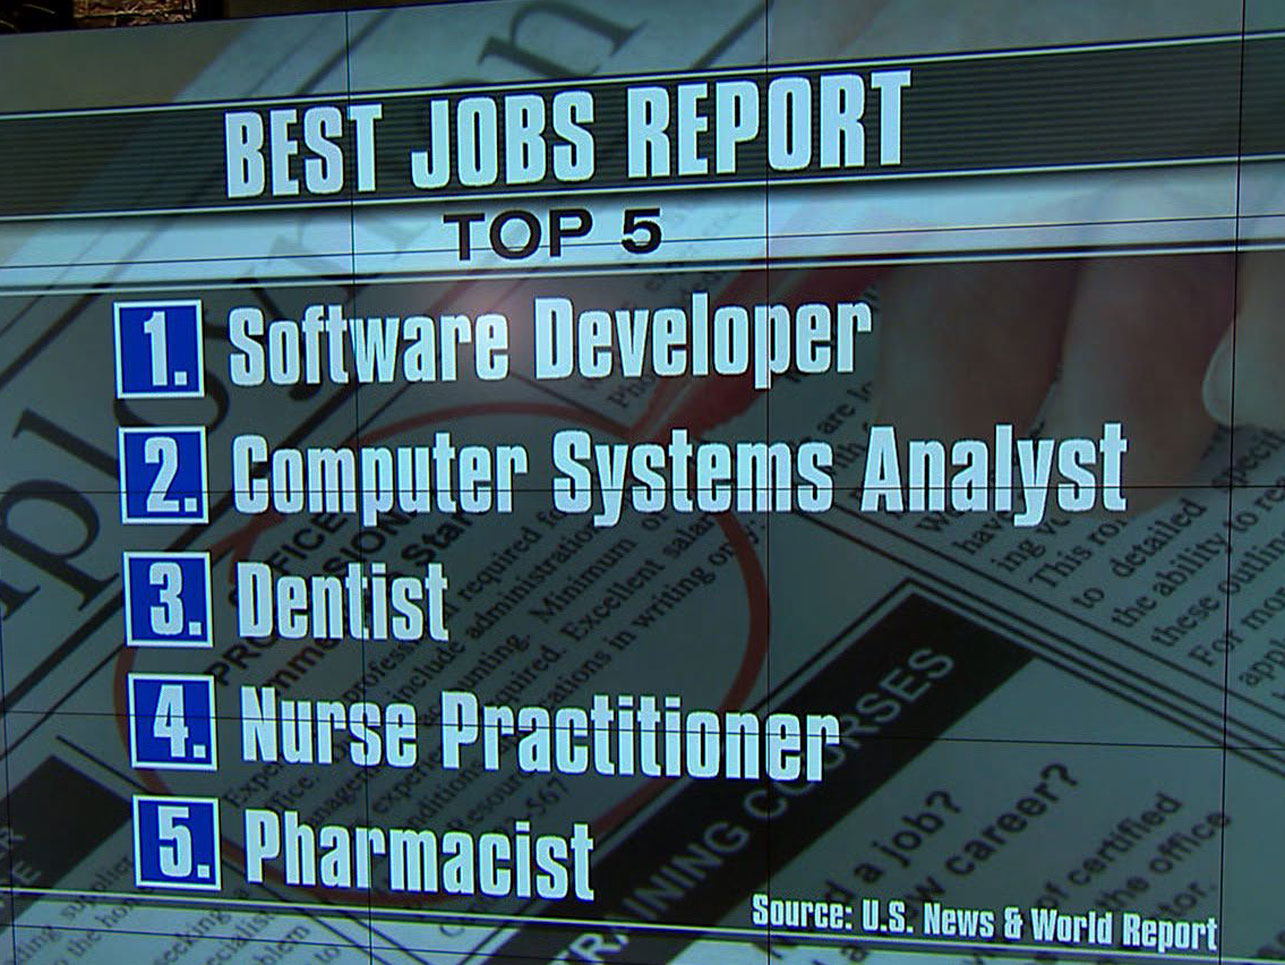 U.S News and World report releases their list of the best jobs for 2014